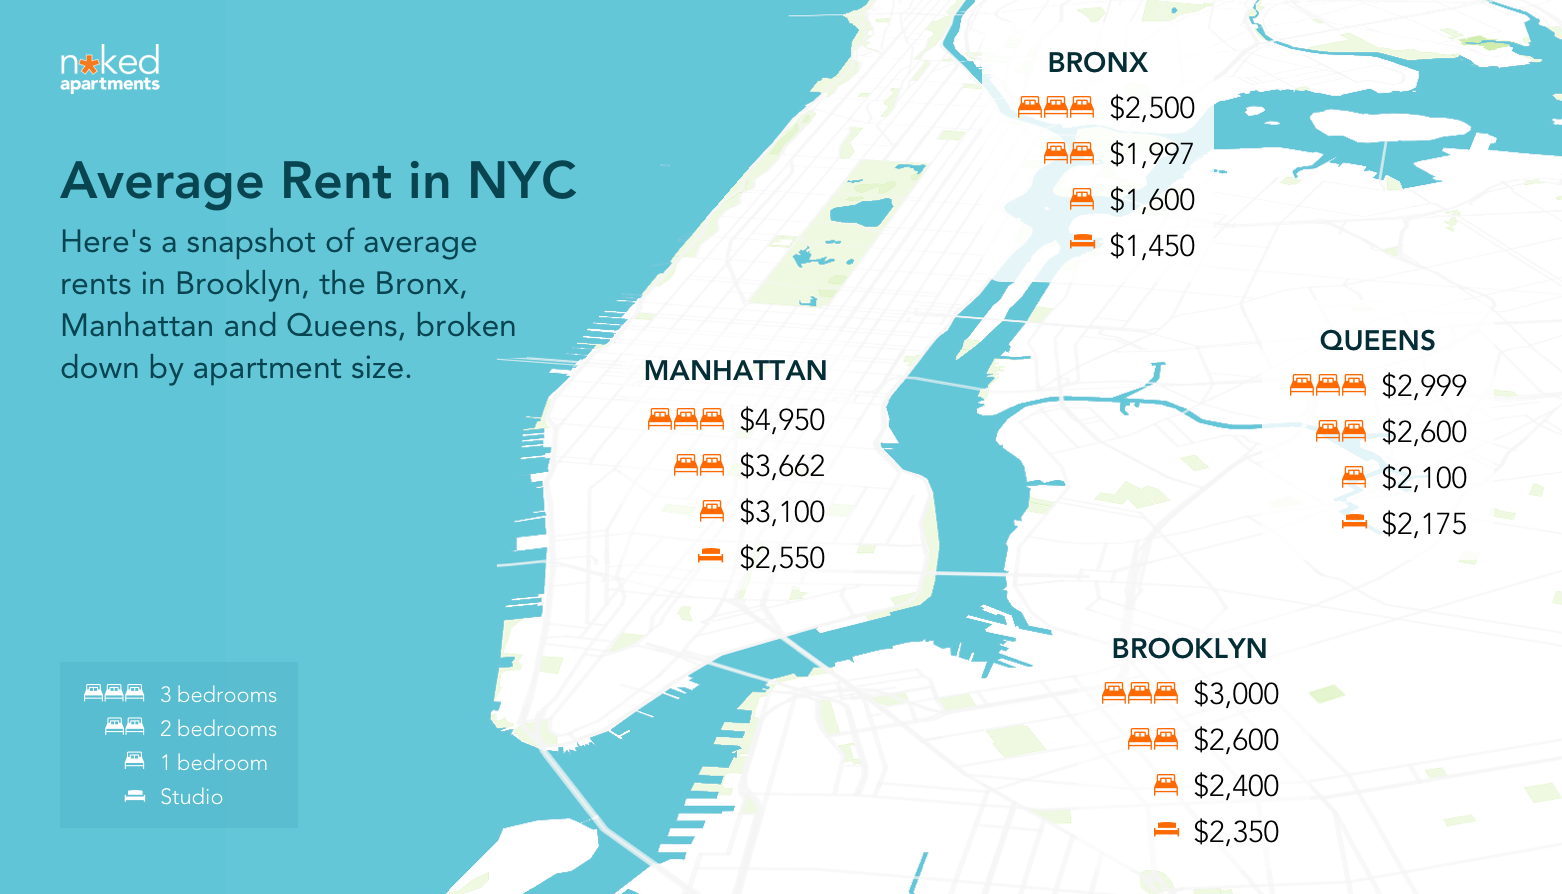 Average Rent NYC Here's What You'll Pay in Rent Naked Apartments